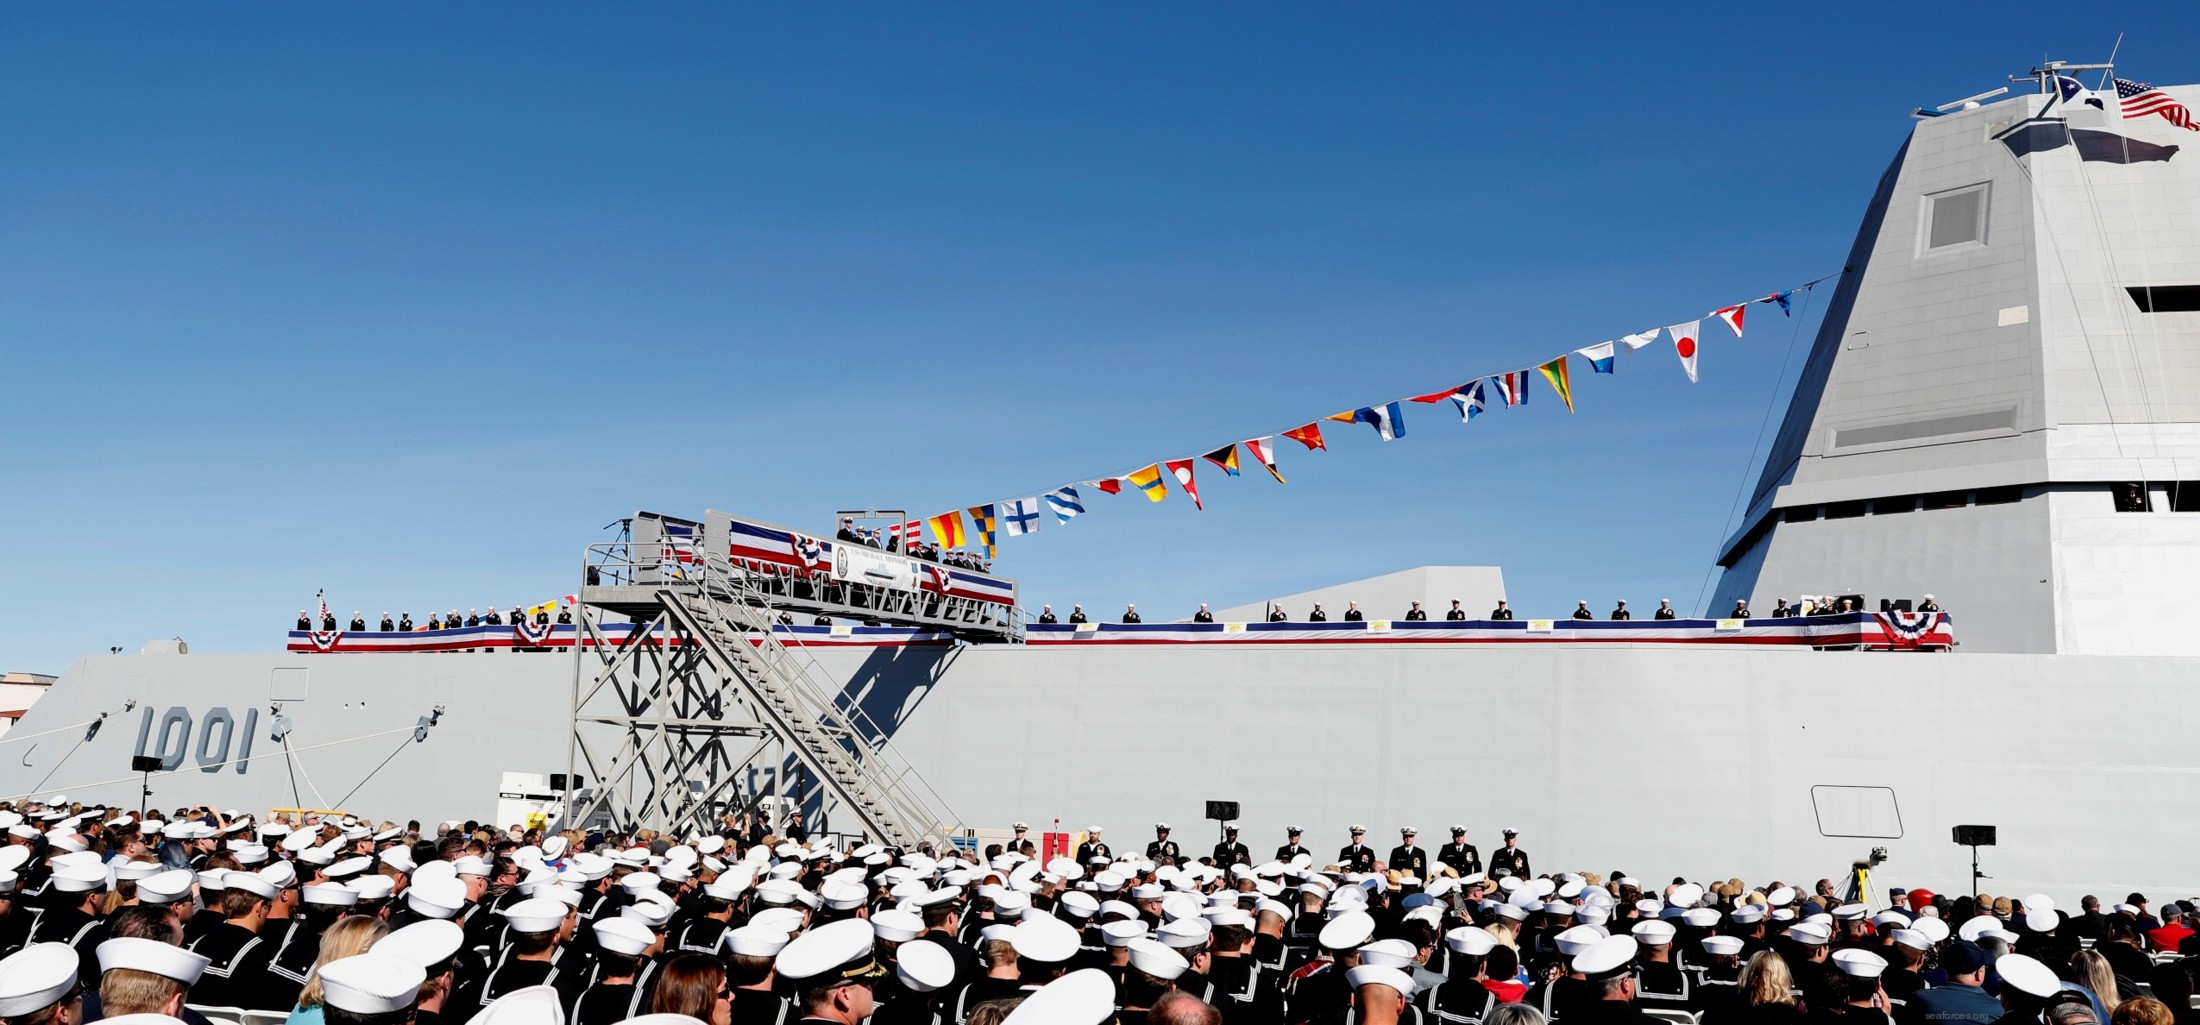 ddg-1001 uss michael monsoor zumwalt class guided missile destroyer us navy commissioning ceremony 19